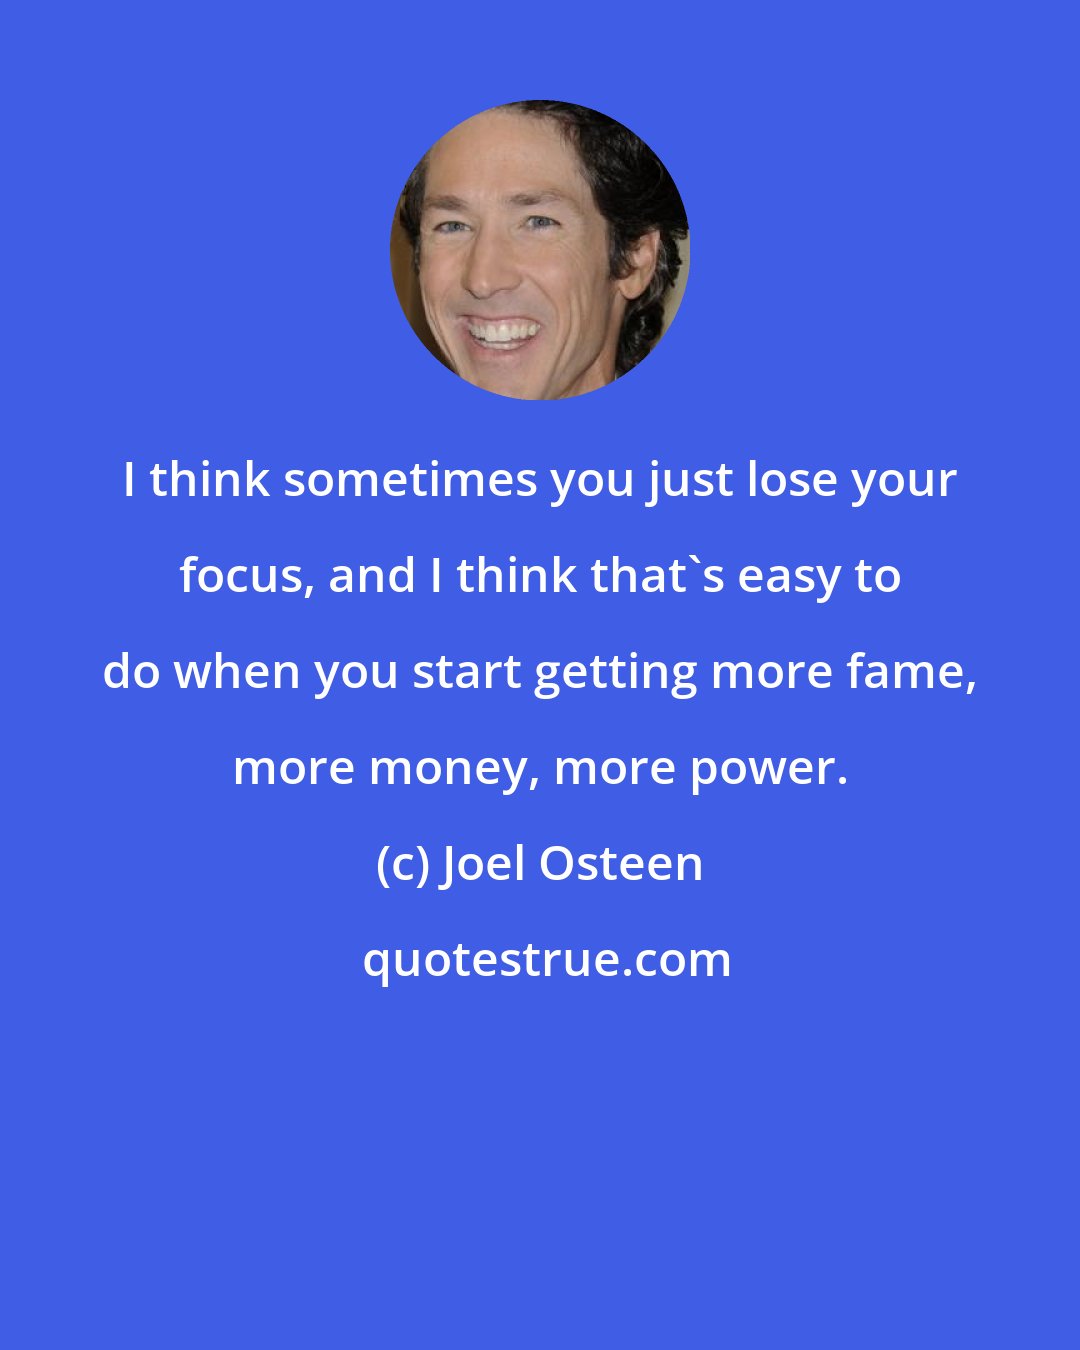 Joel Osteen: I think sometimes you just lose your focus, and I think that's easy to do when you start getting more fame, more money, more power.